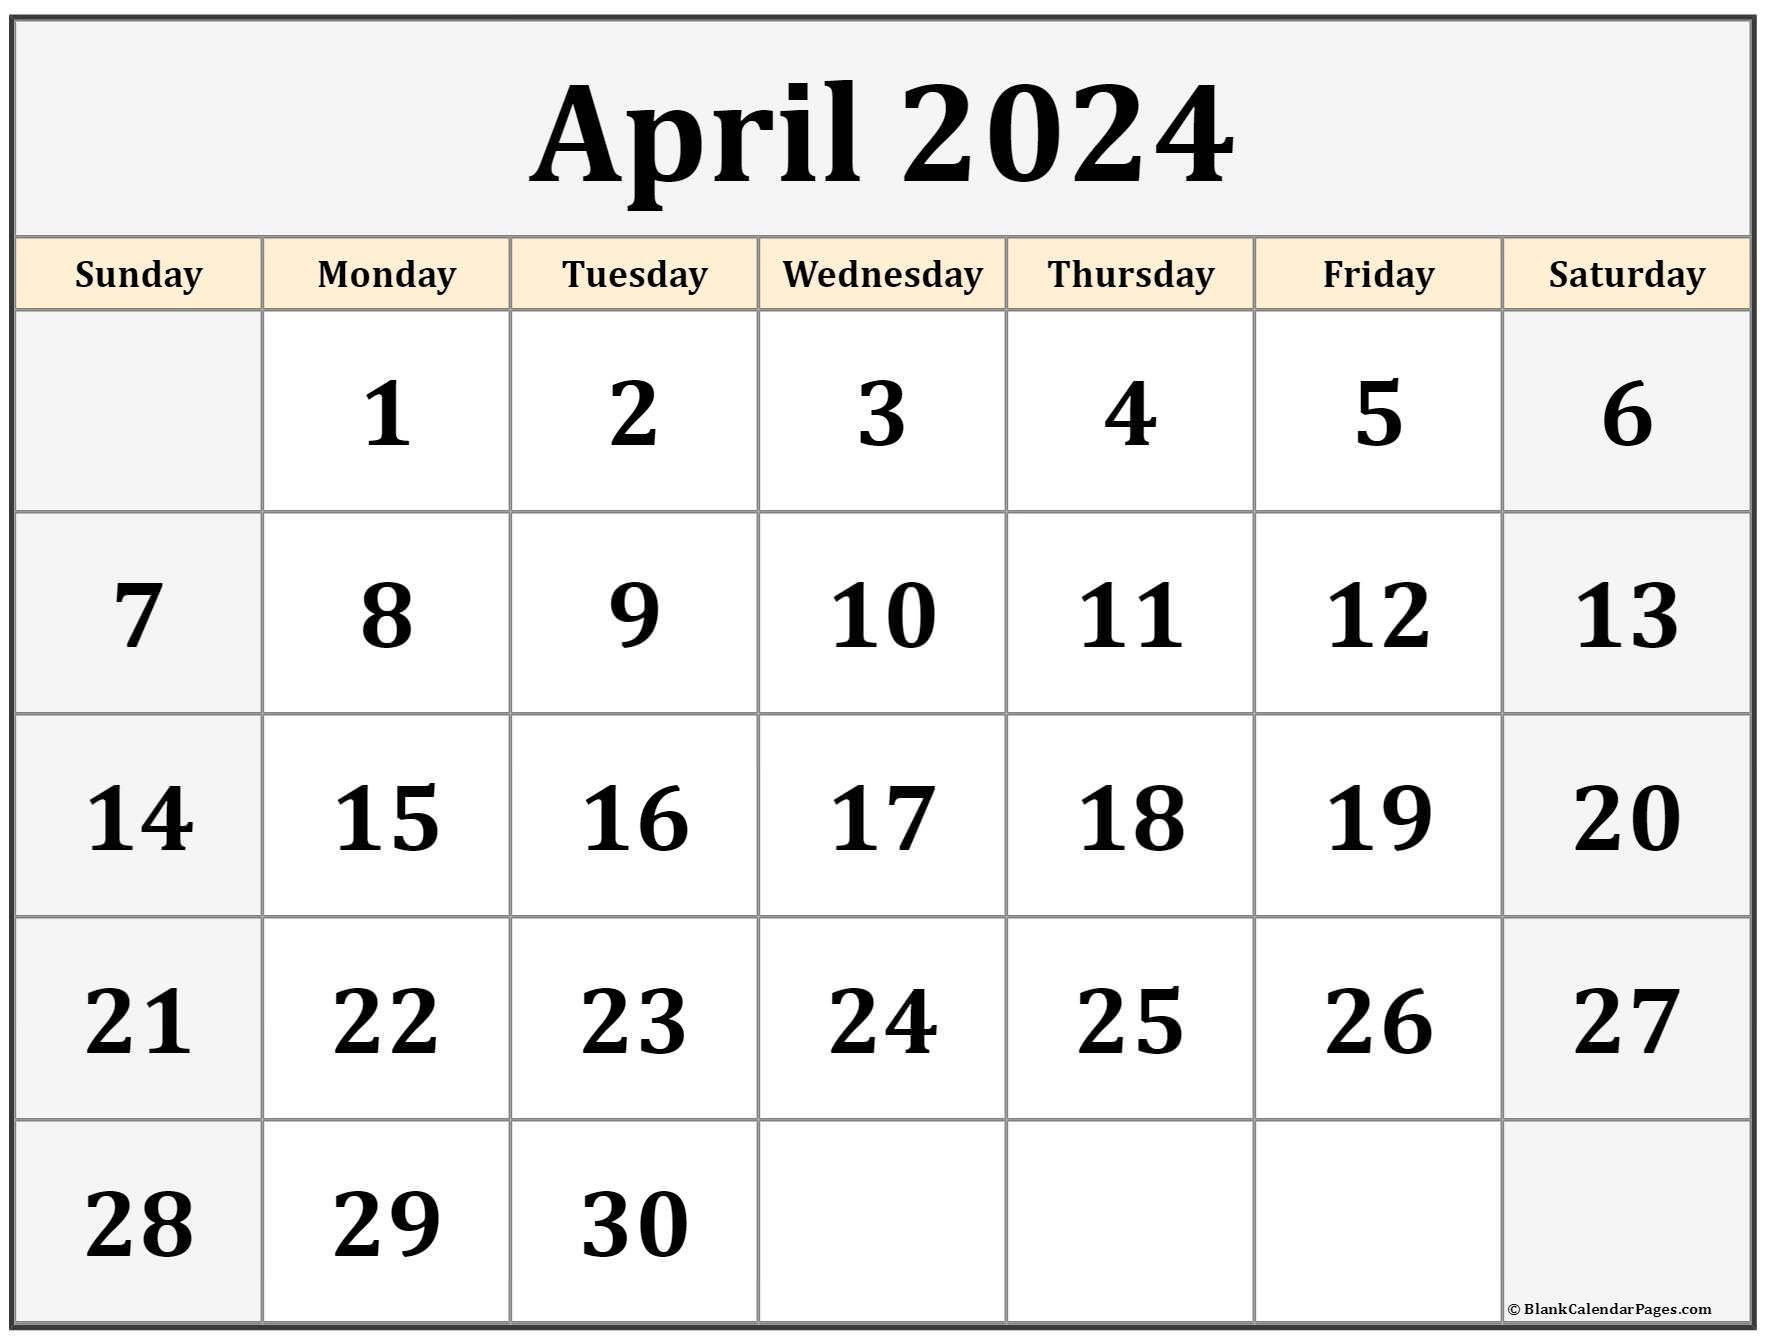 April 2024 Calendar Of The Month Free Printable April Calendar Of The - Free Printable 2024 Calendar April